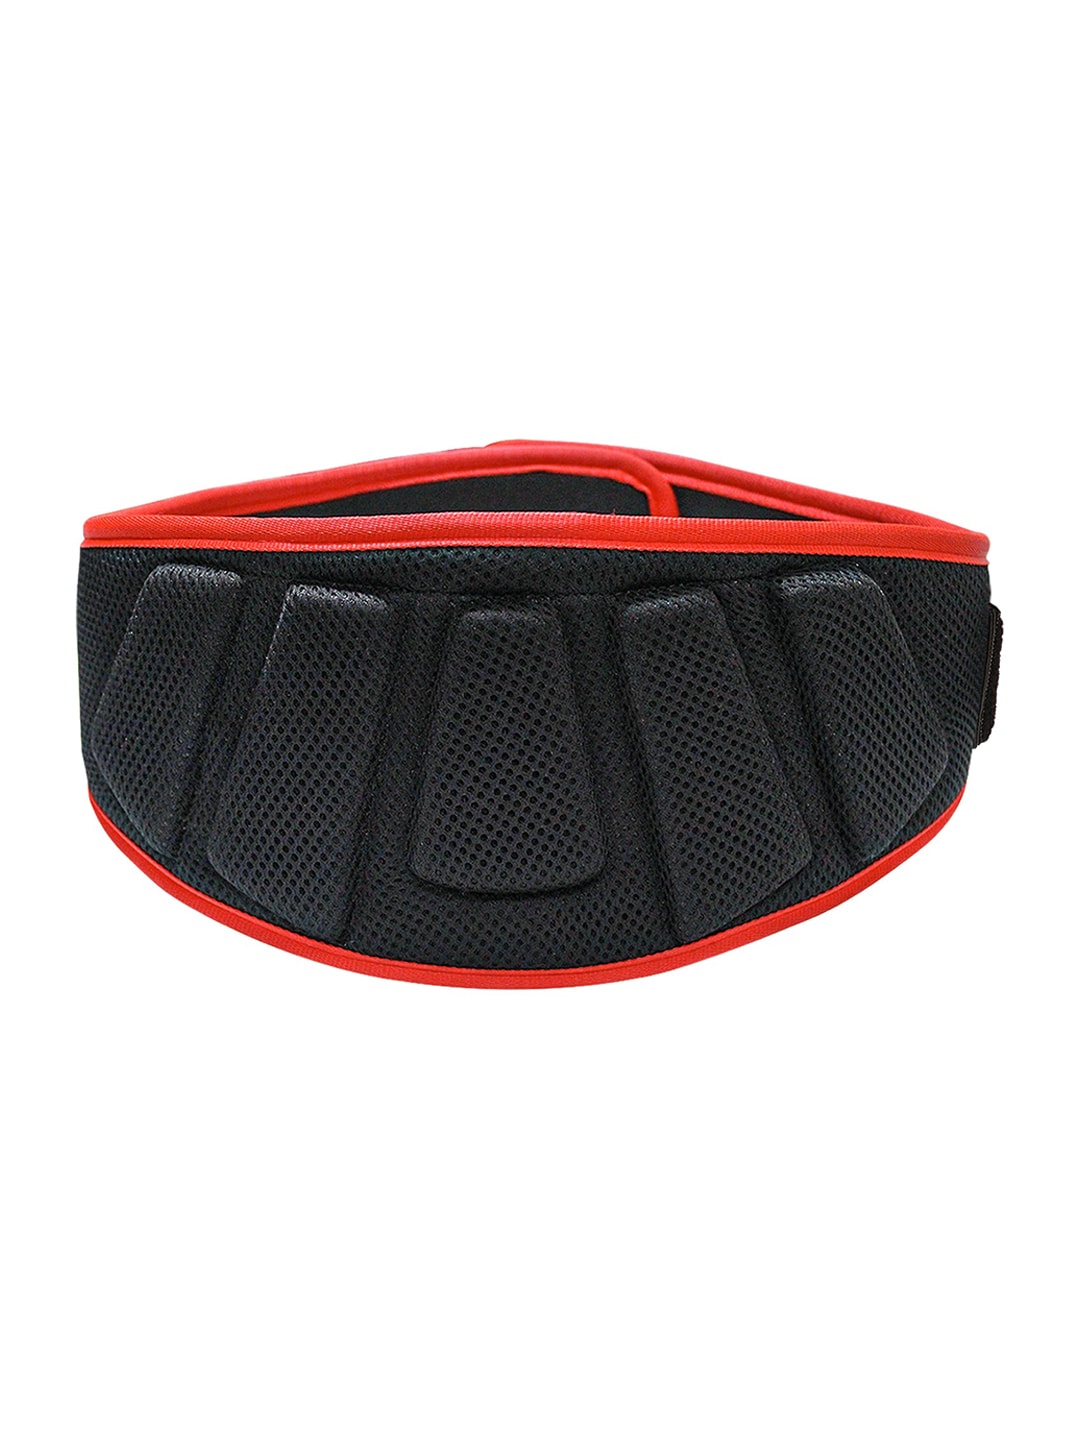 MUSCLEXP Solid Sports Accessories Price in India